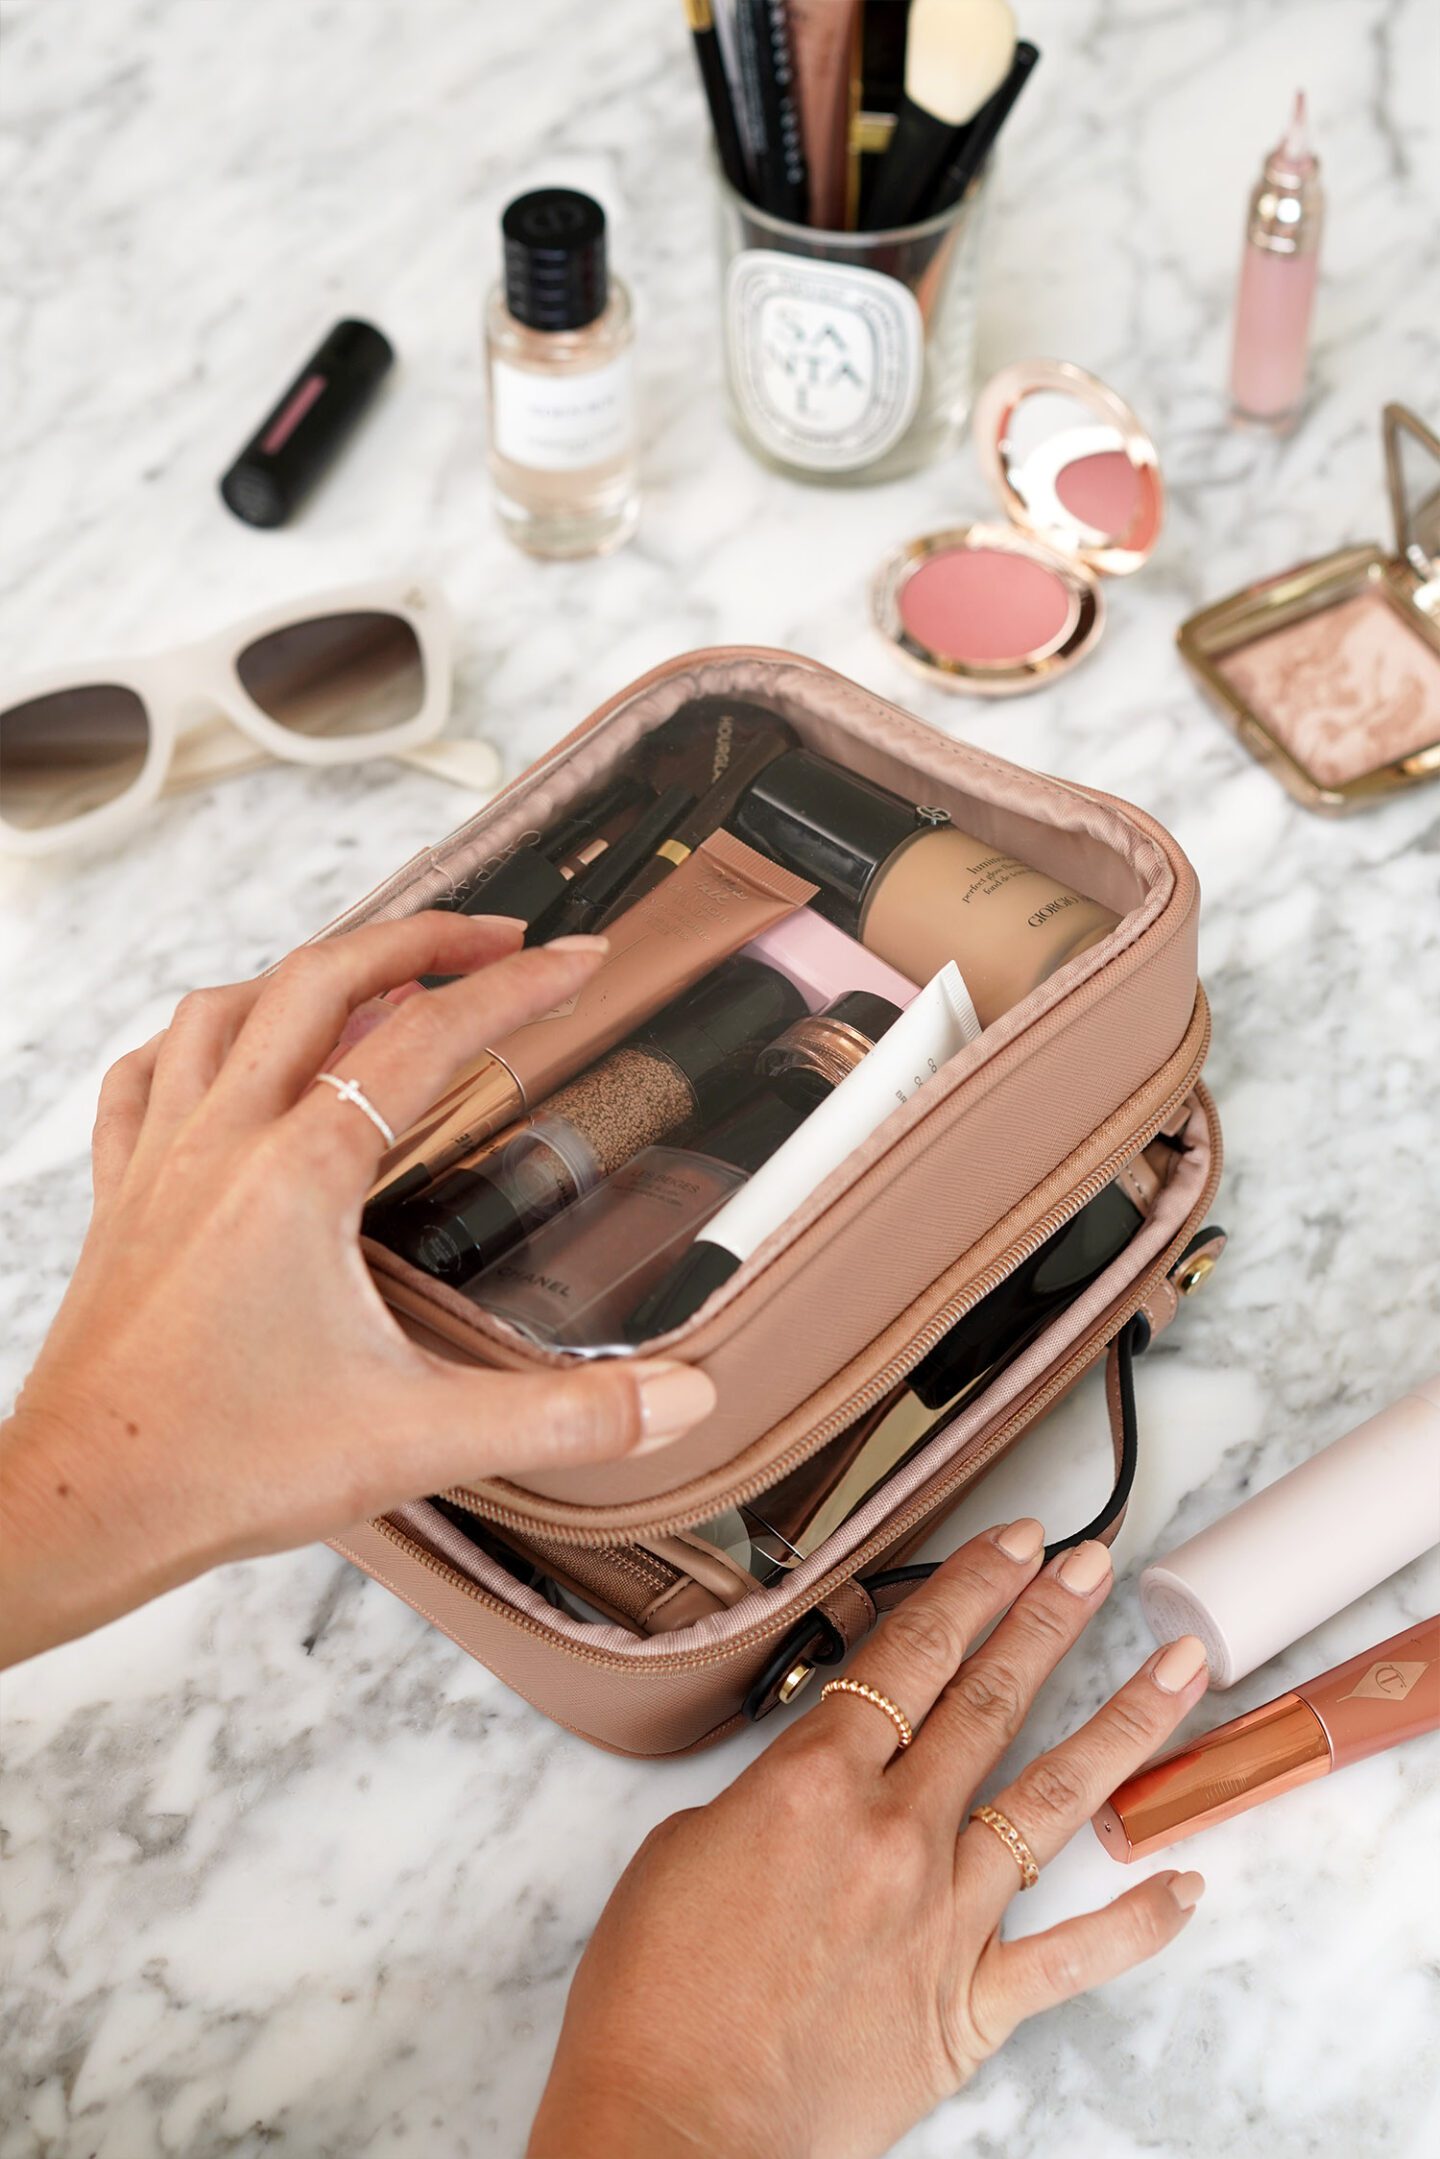 Away Travel Minis are Back! - The Beauty Look Book